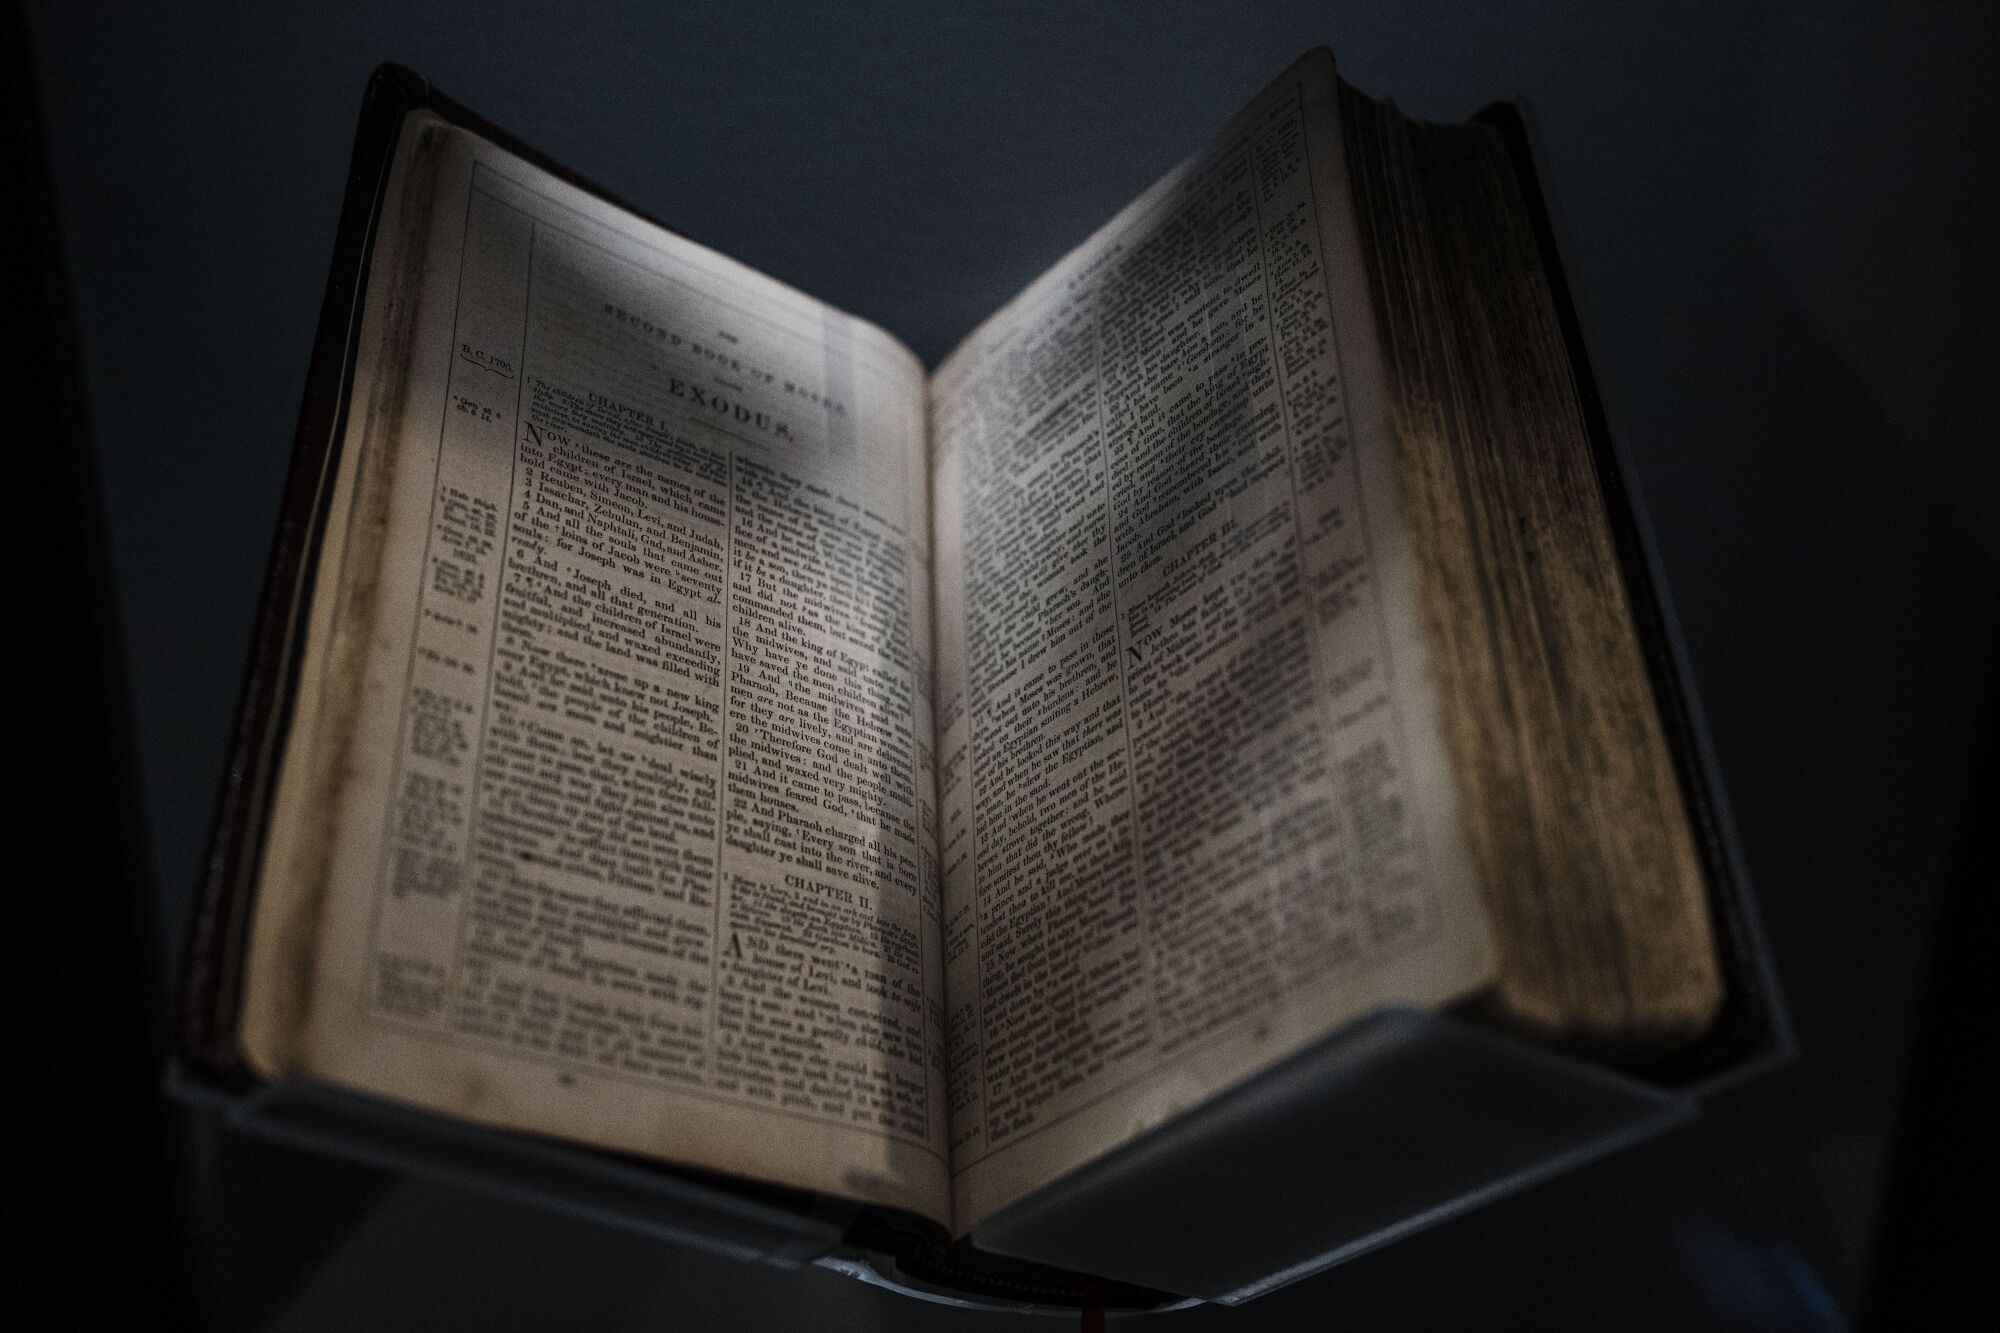 The Collins Bible at the National Museum of African American History and Culture